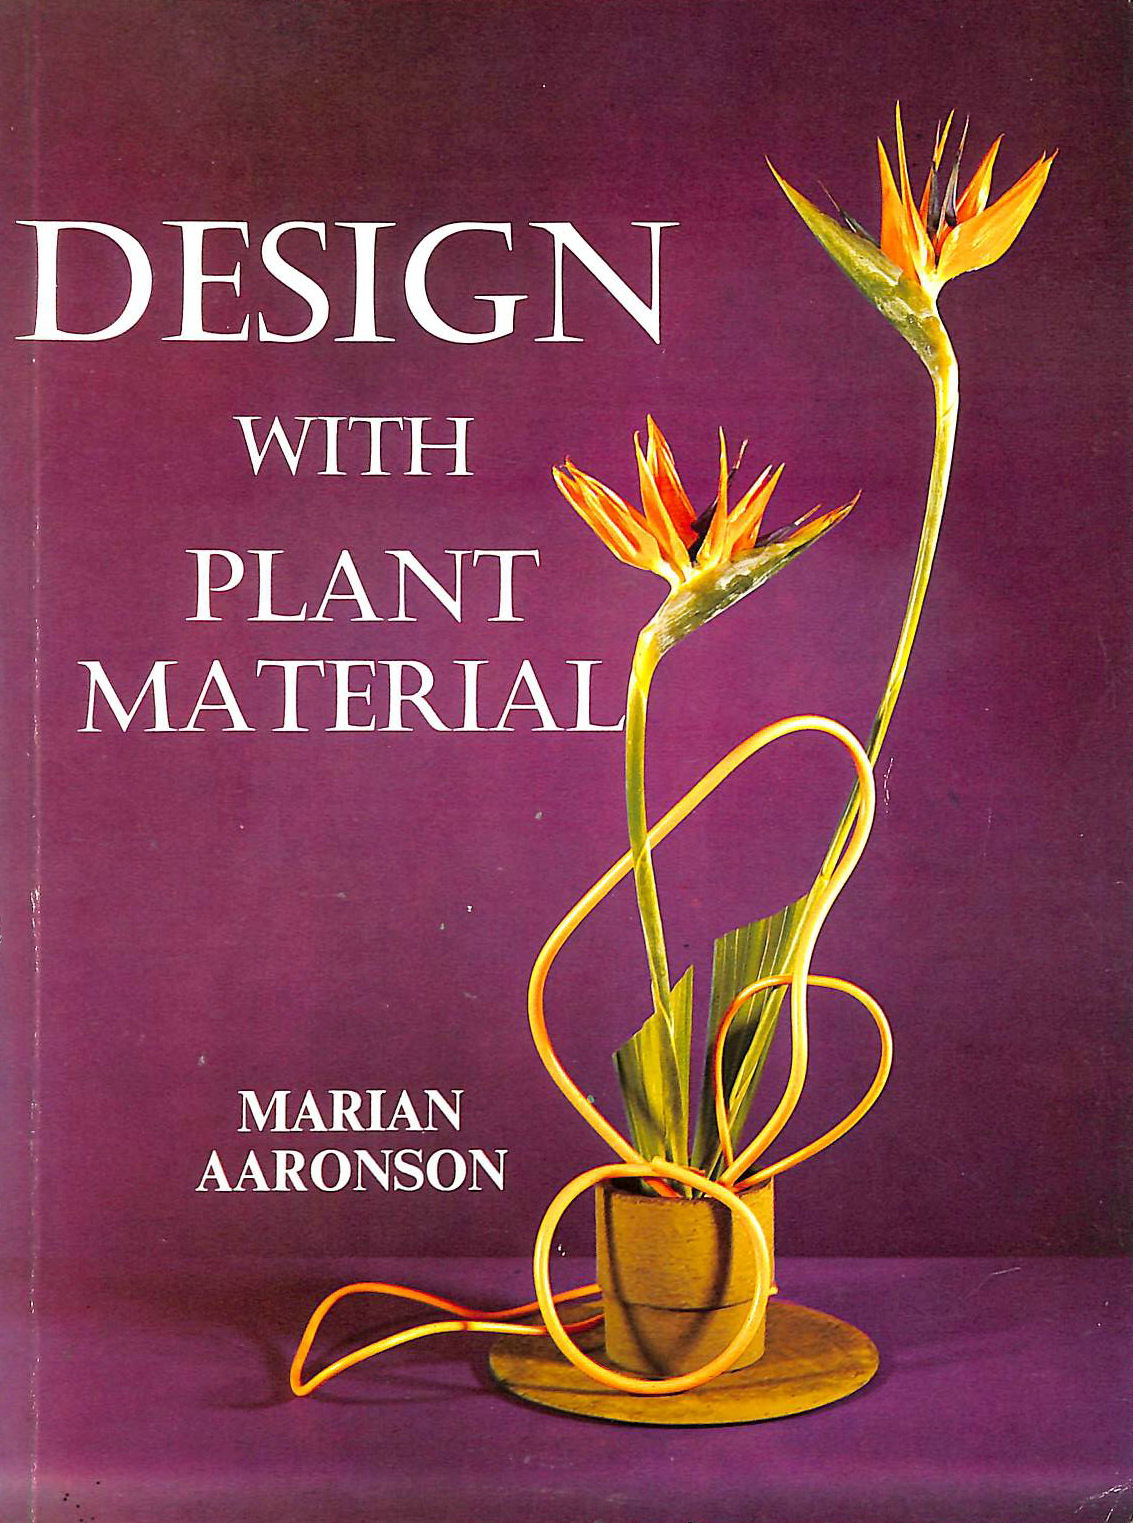 AARONSON, MARIAN - Design with Plant Material